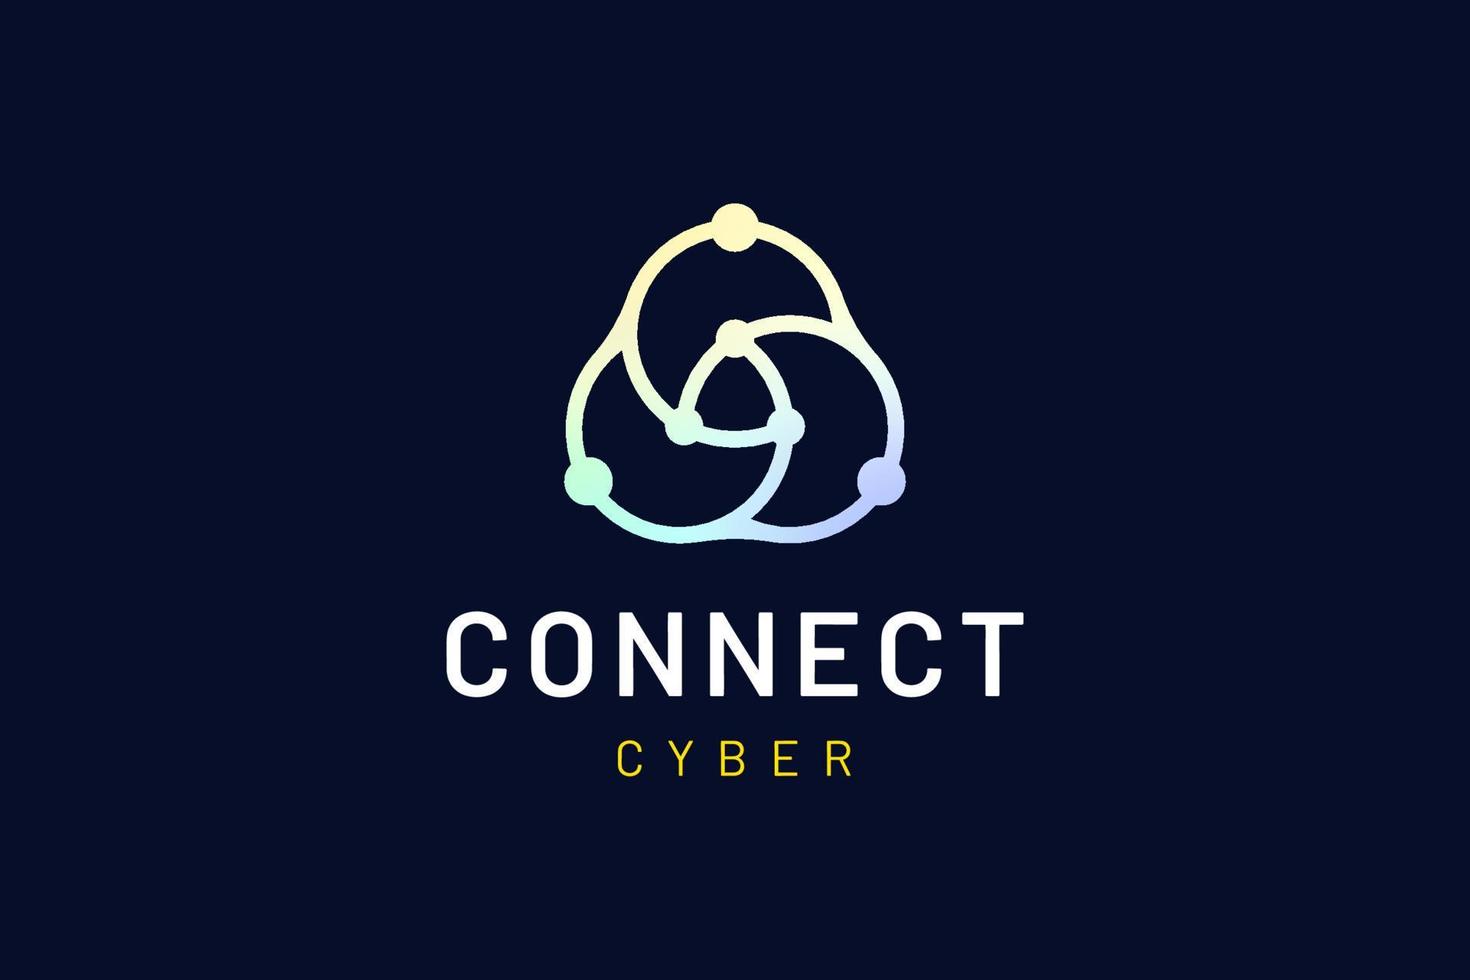 Abstract logo in modern shape representing connection or network technology vector